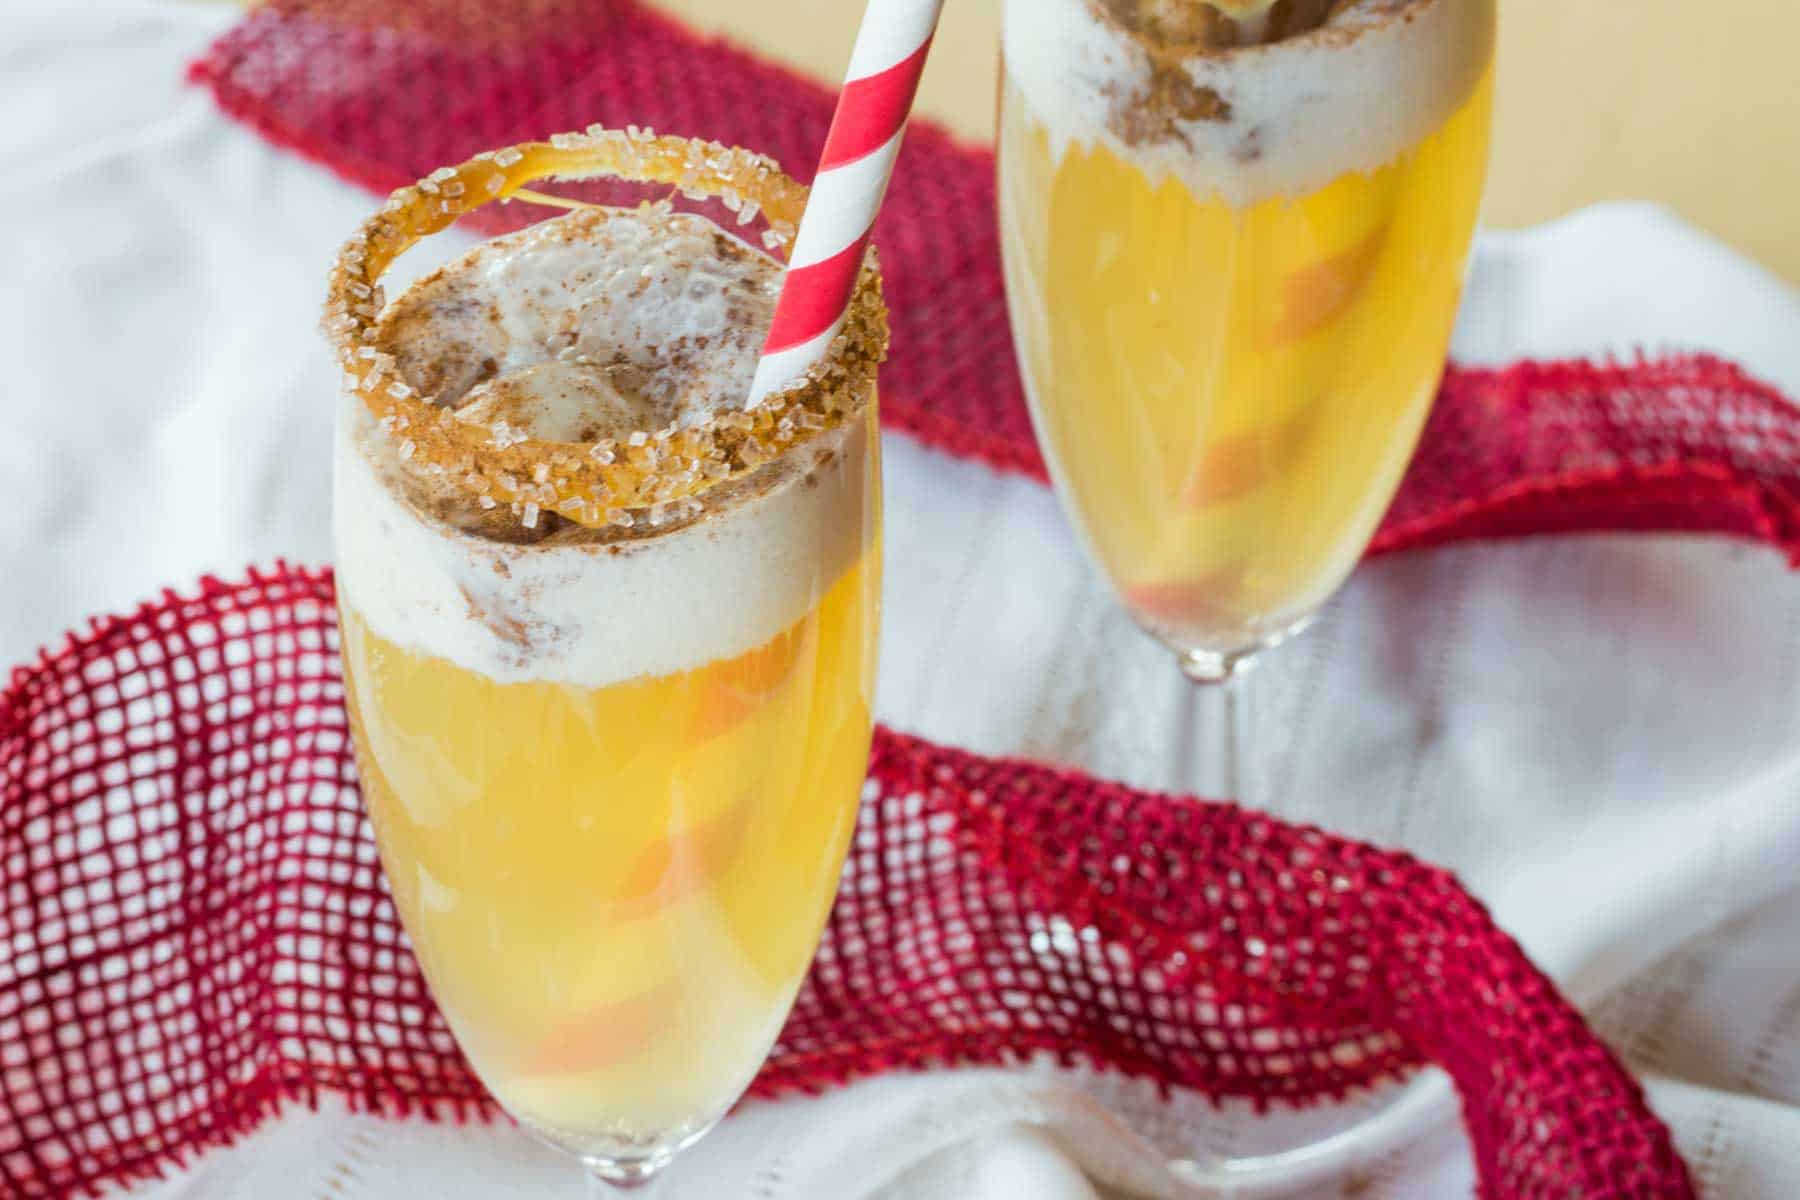 A champagne flute of sparkling cider with a scoop of vanilla ice cream in it with a cinnamon-sugar rim.